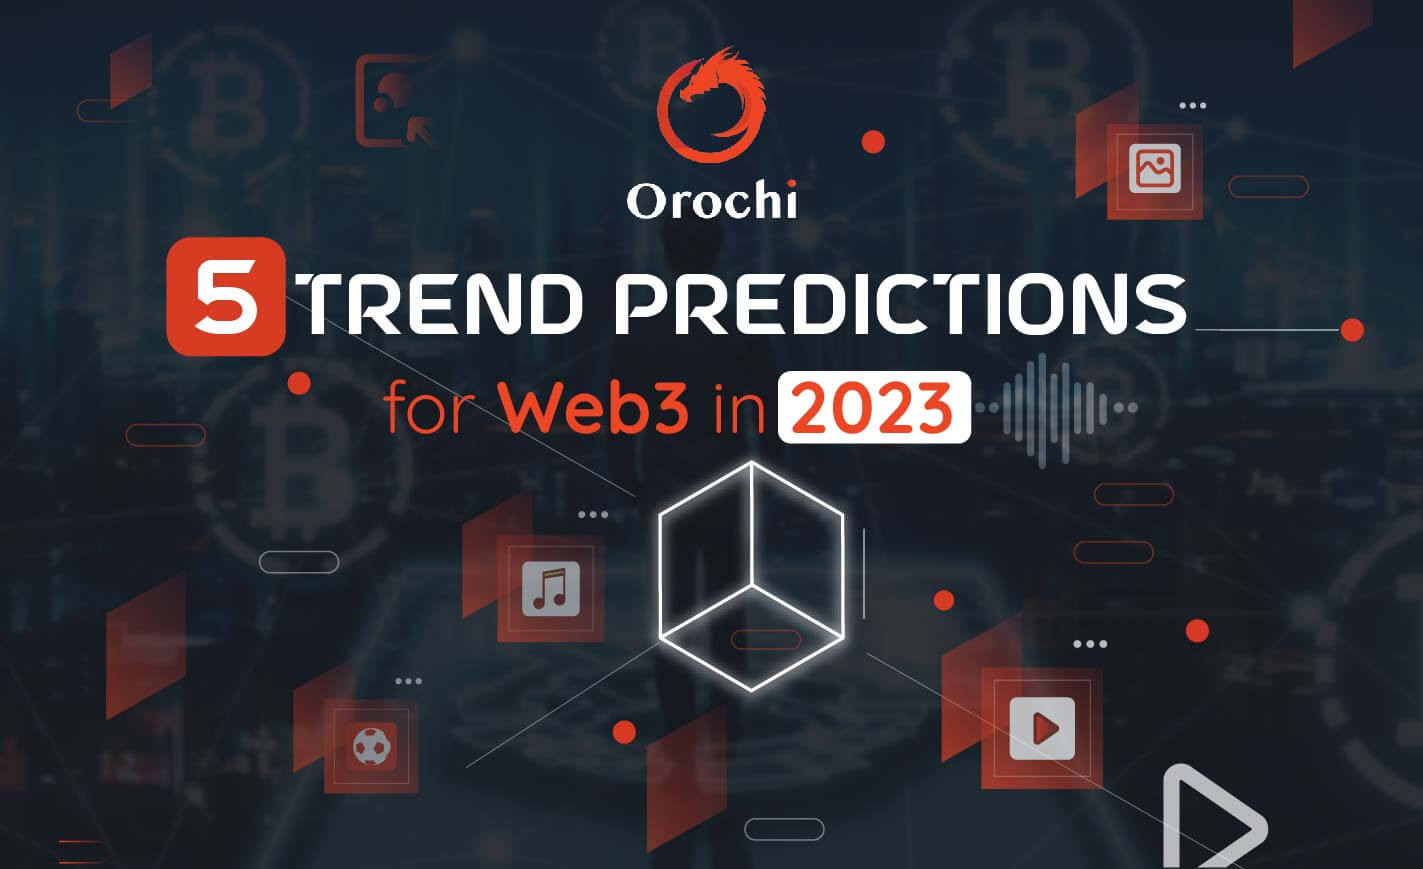 5 Trend Predictions for Web3 in 2023